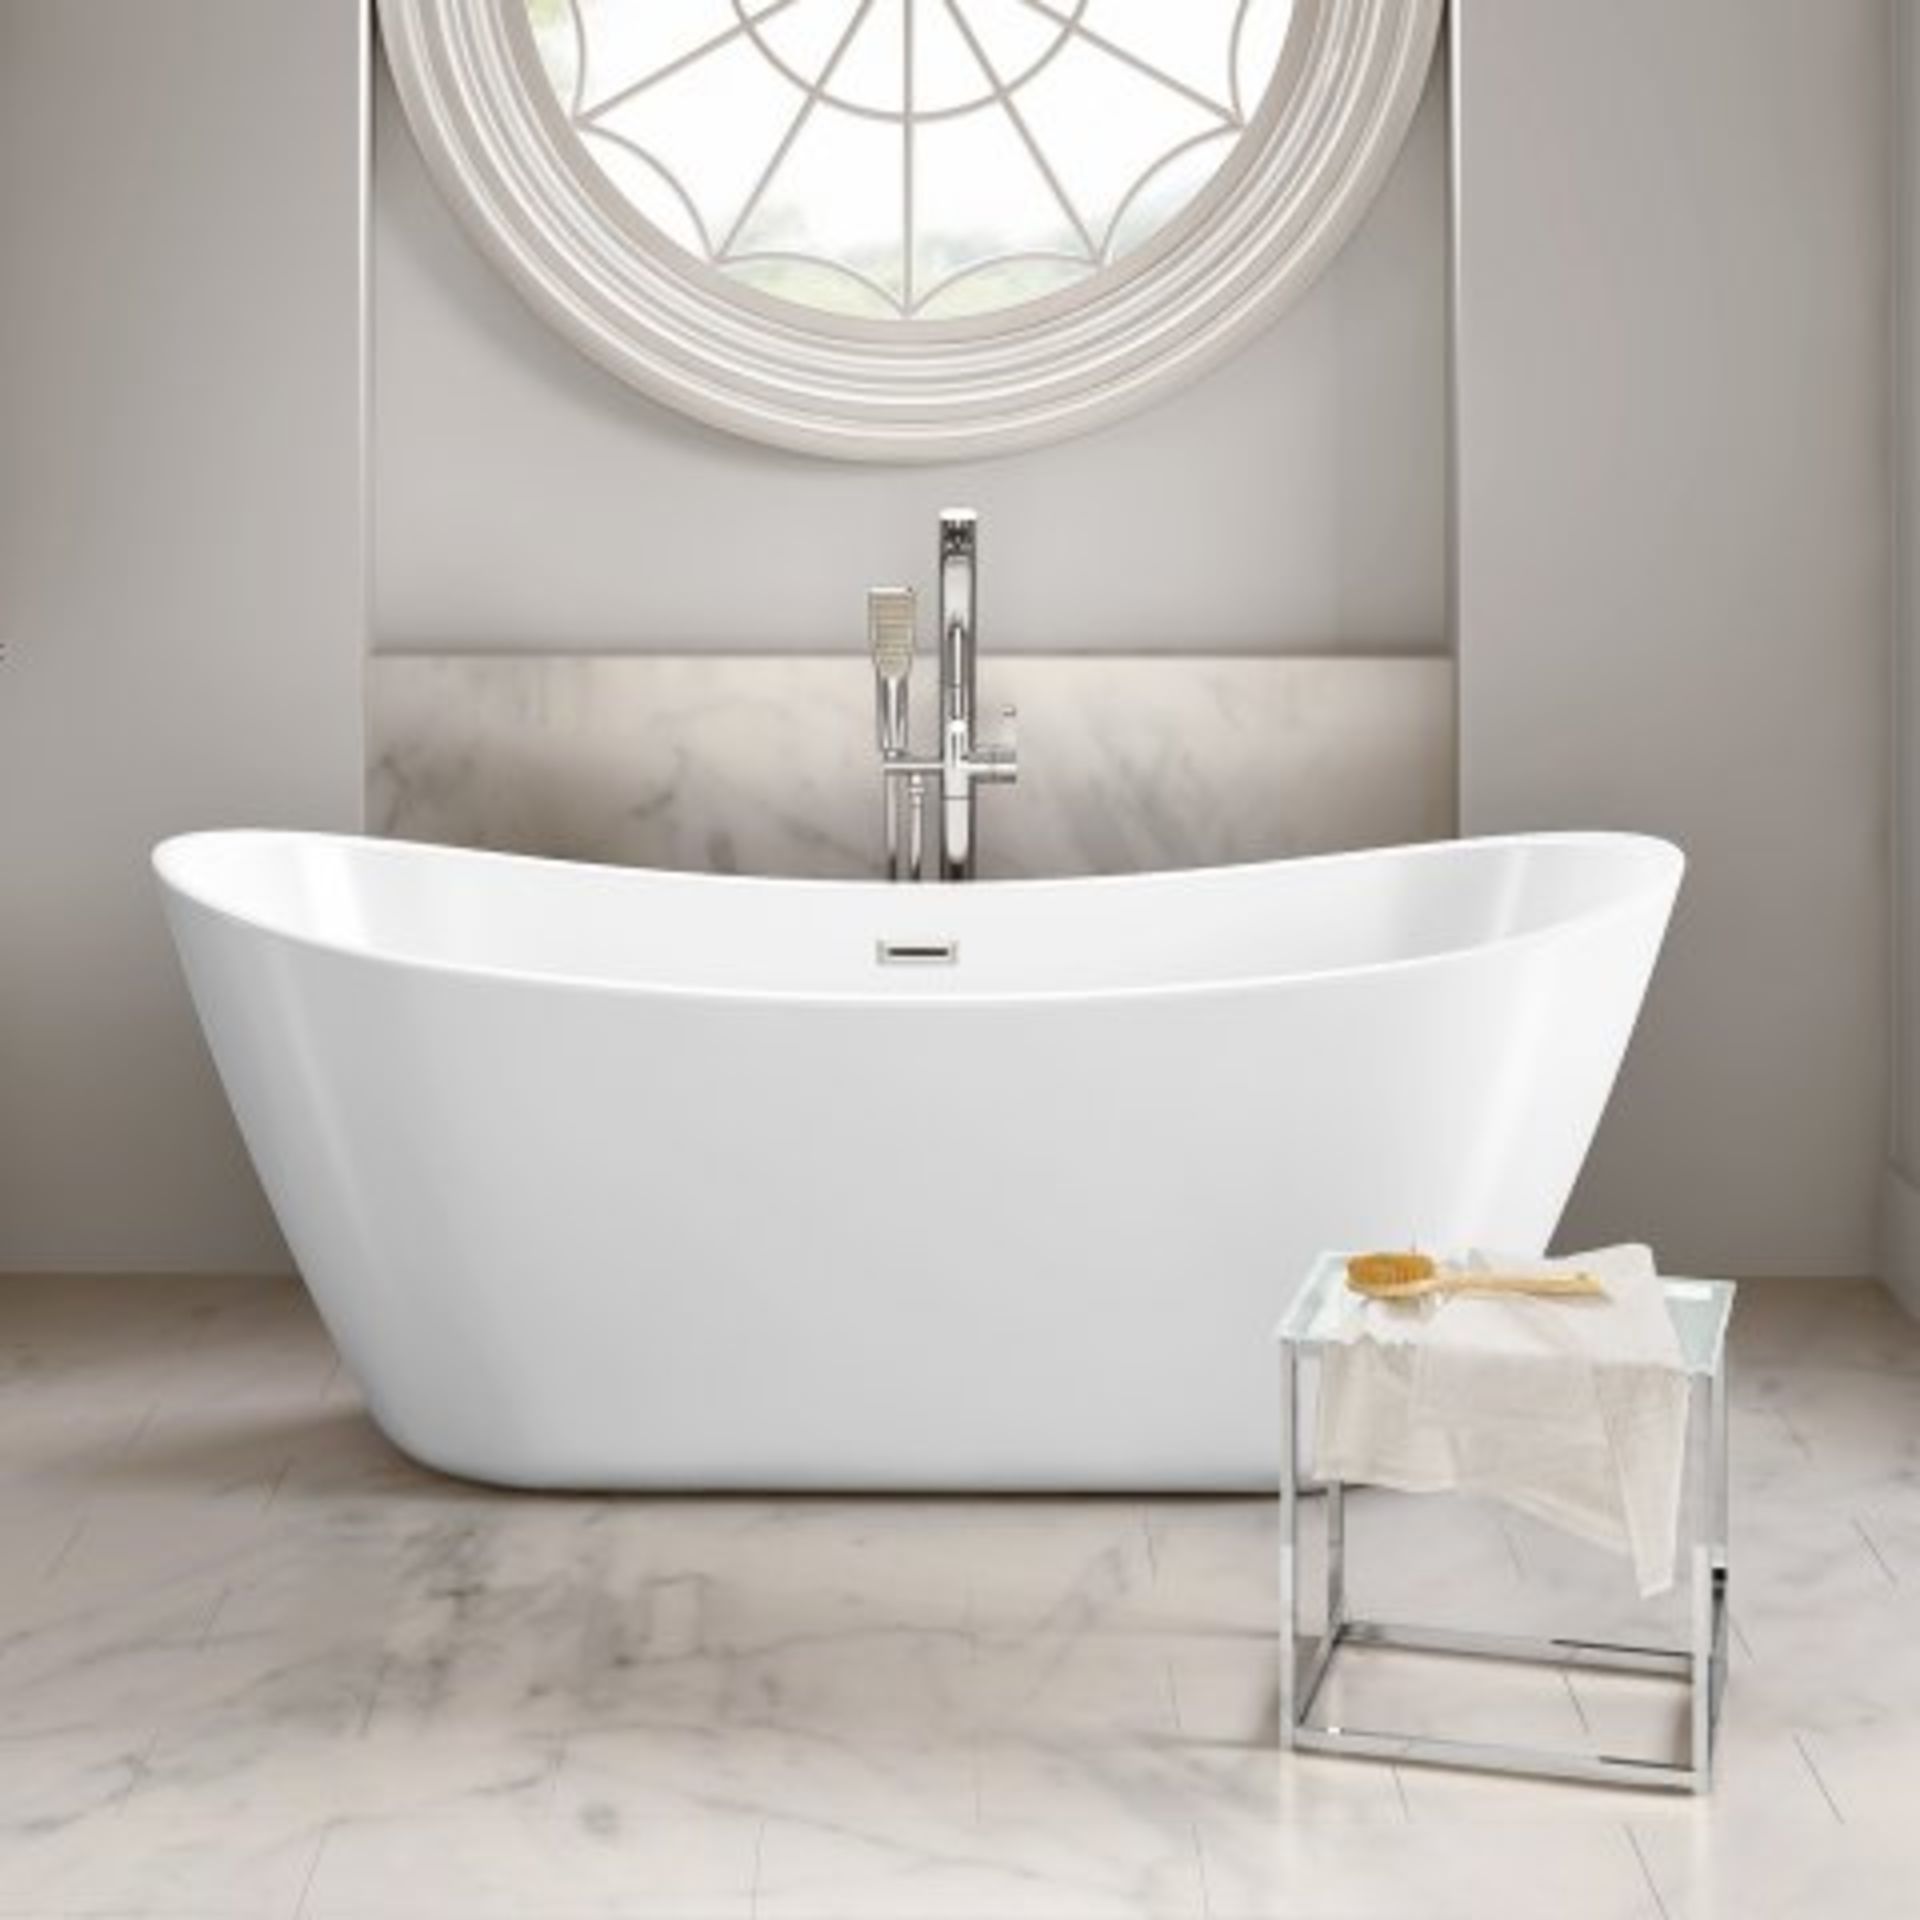 (O7) 1830mmx710mm Caitlyn Freestanding Bath - Large. RRP £1,499. Showcasing contemporary clean lines